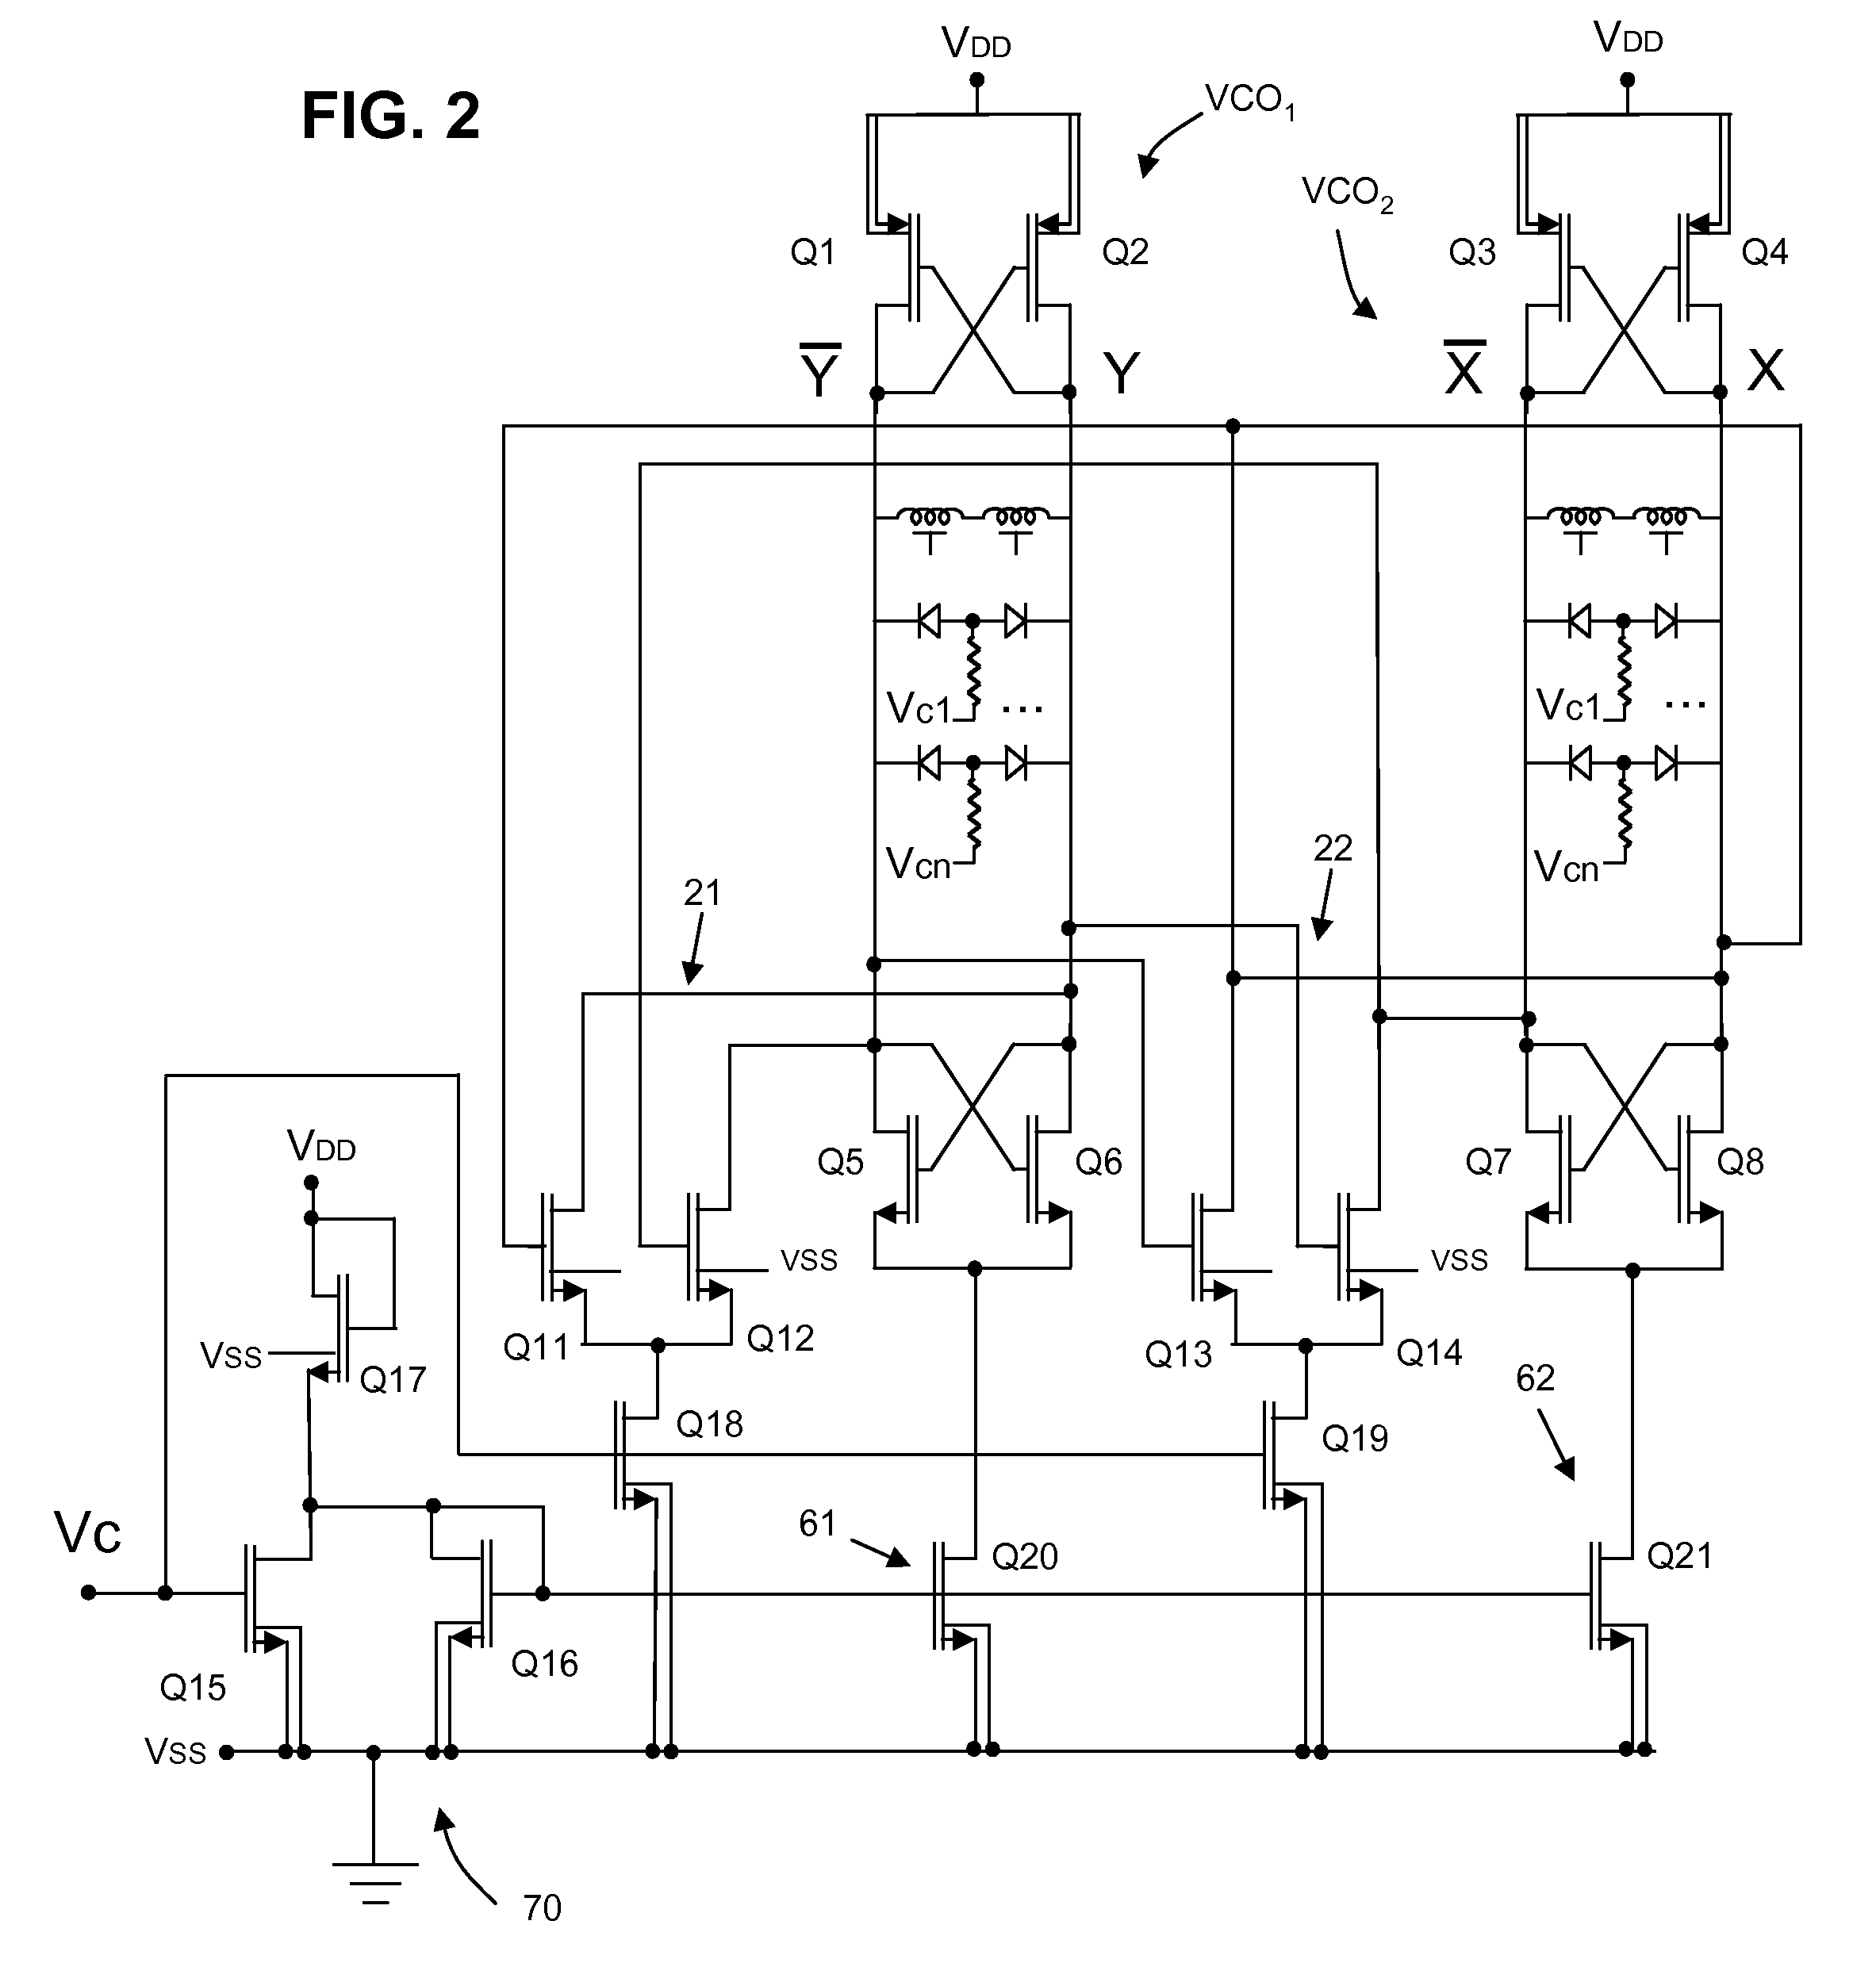 Quadrature LC voltage controlled oscillator with opposed bias and coupling control stages